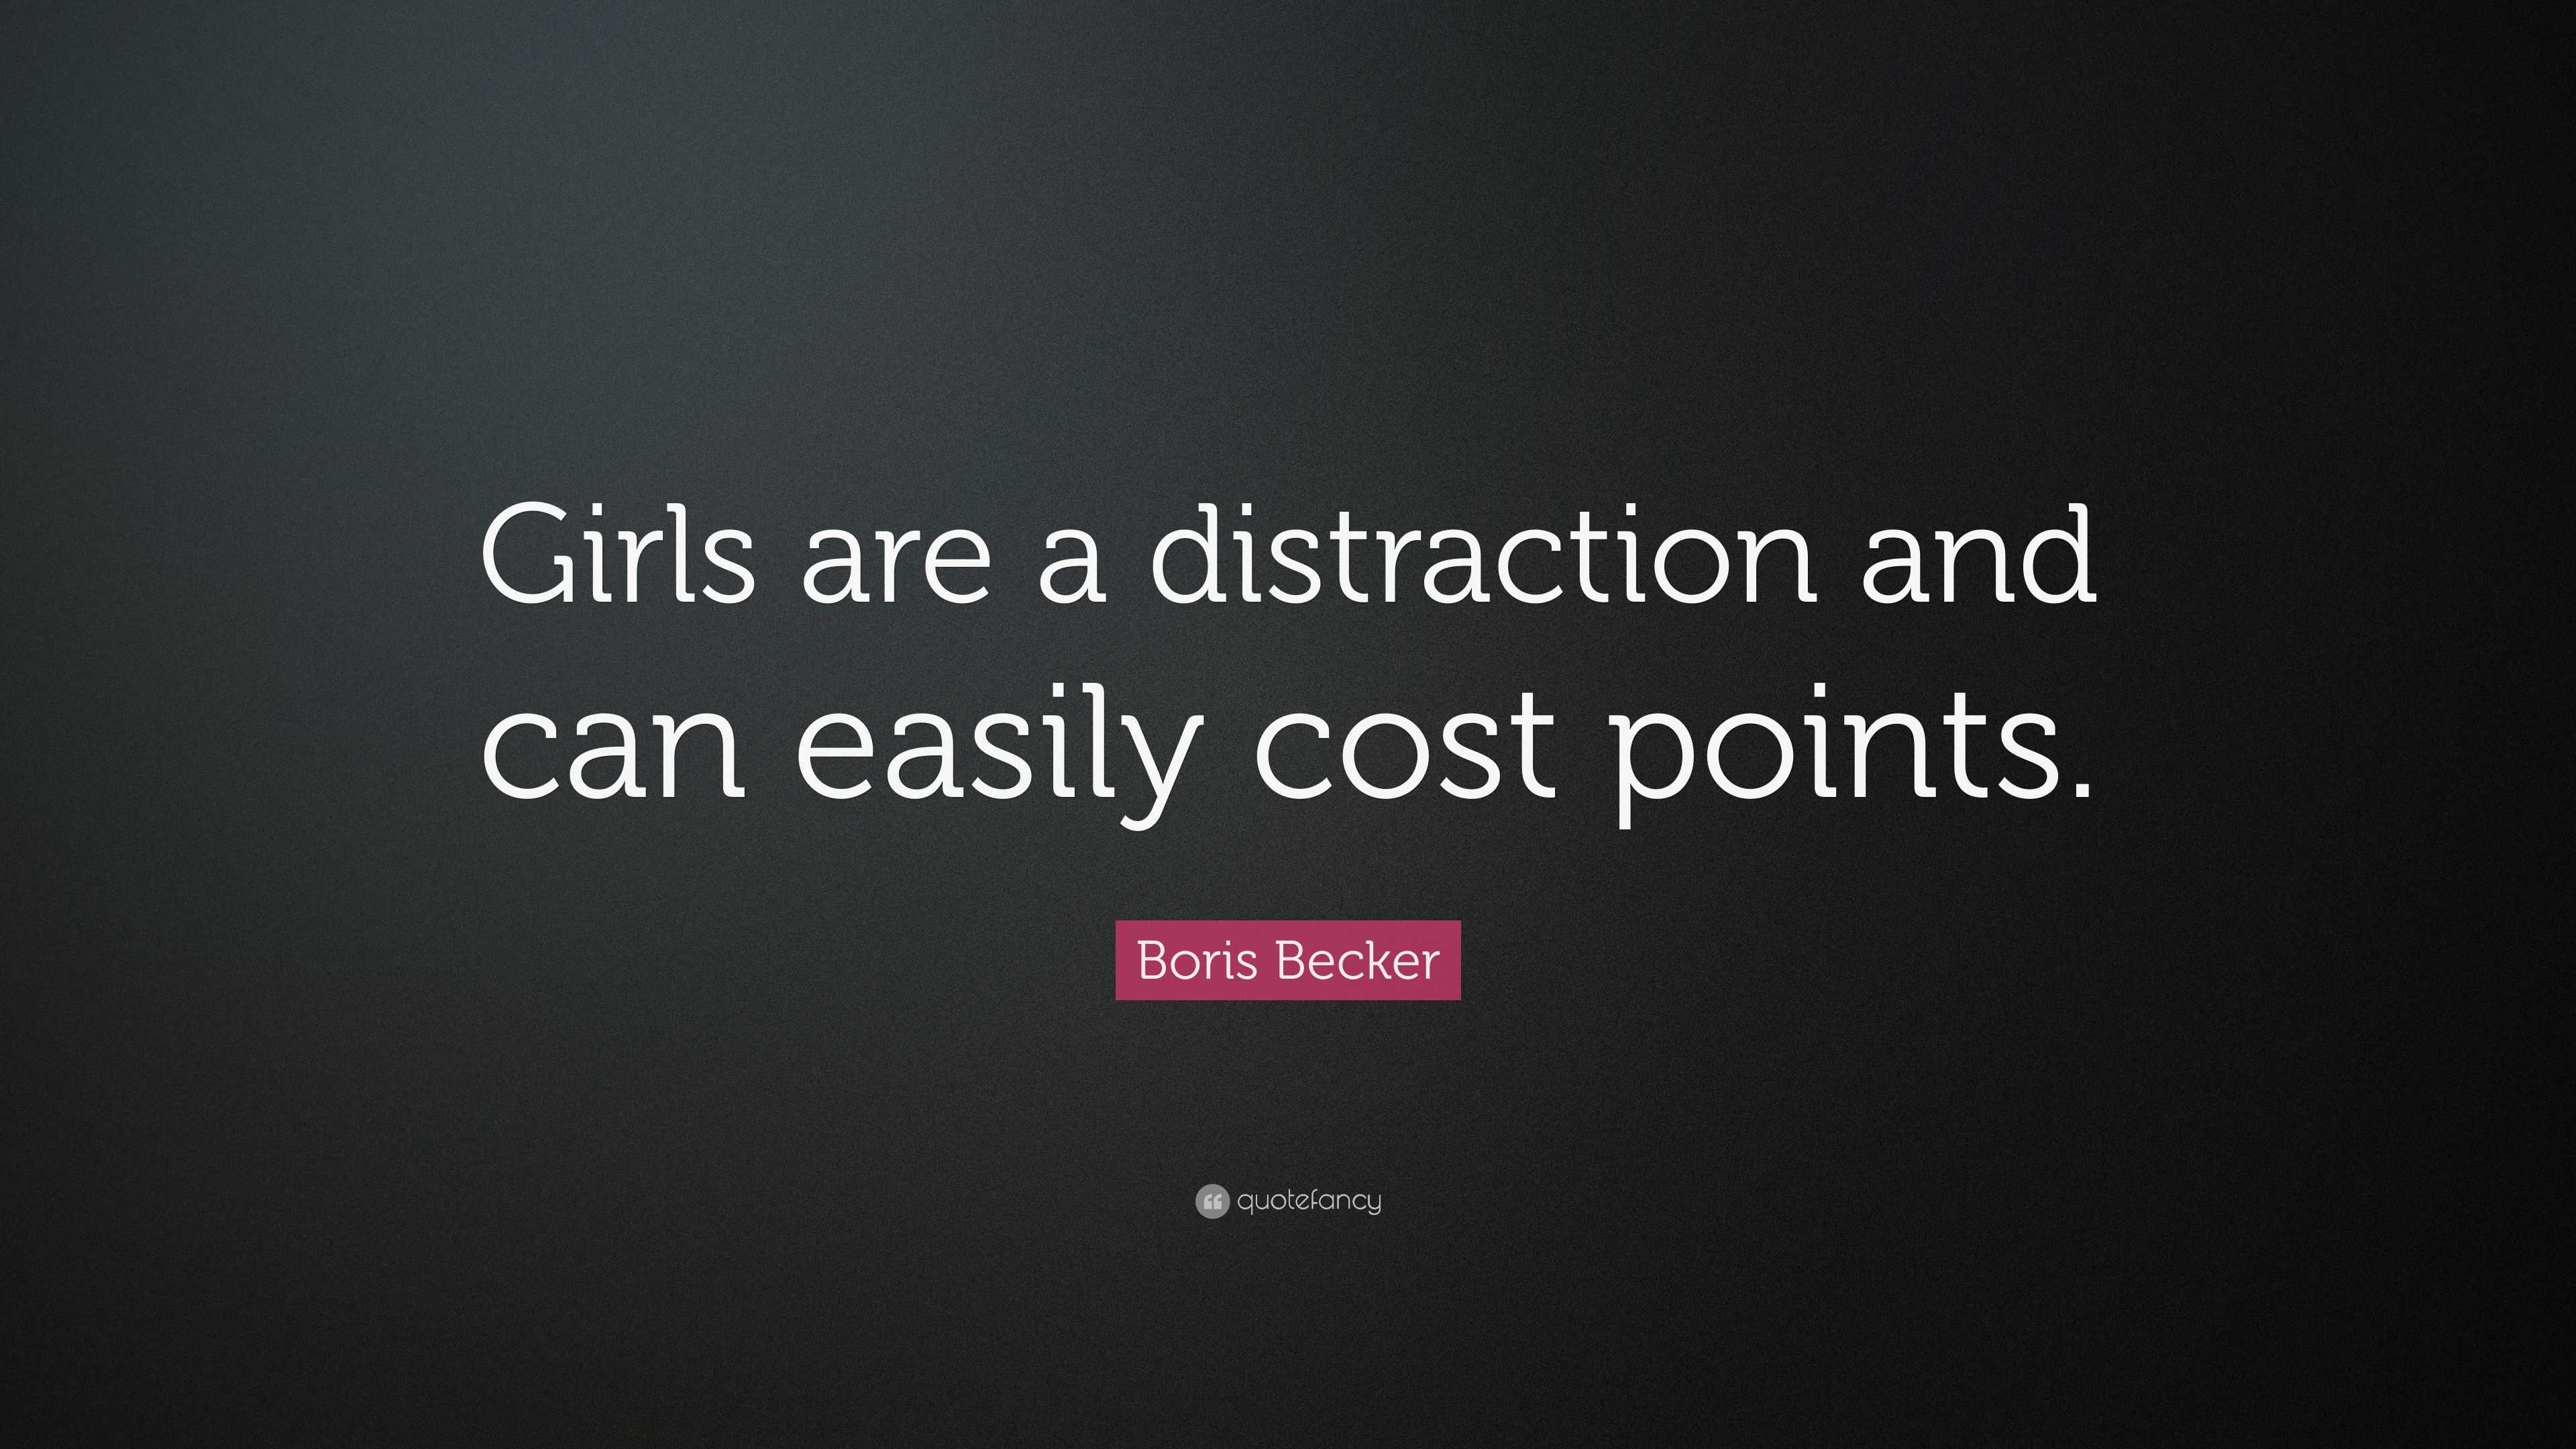 Boris Becker Quote: “Girls are a distraction and can easily cost